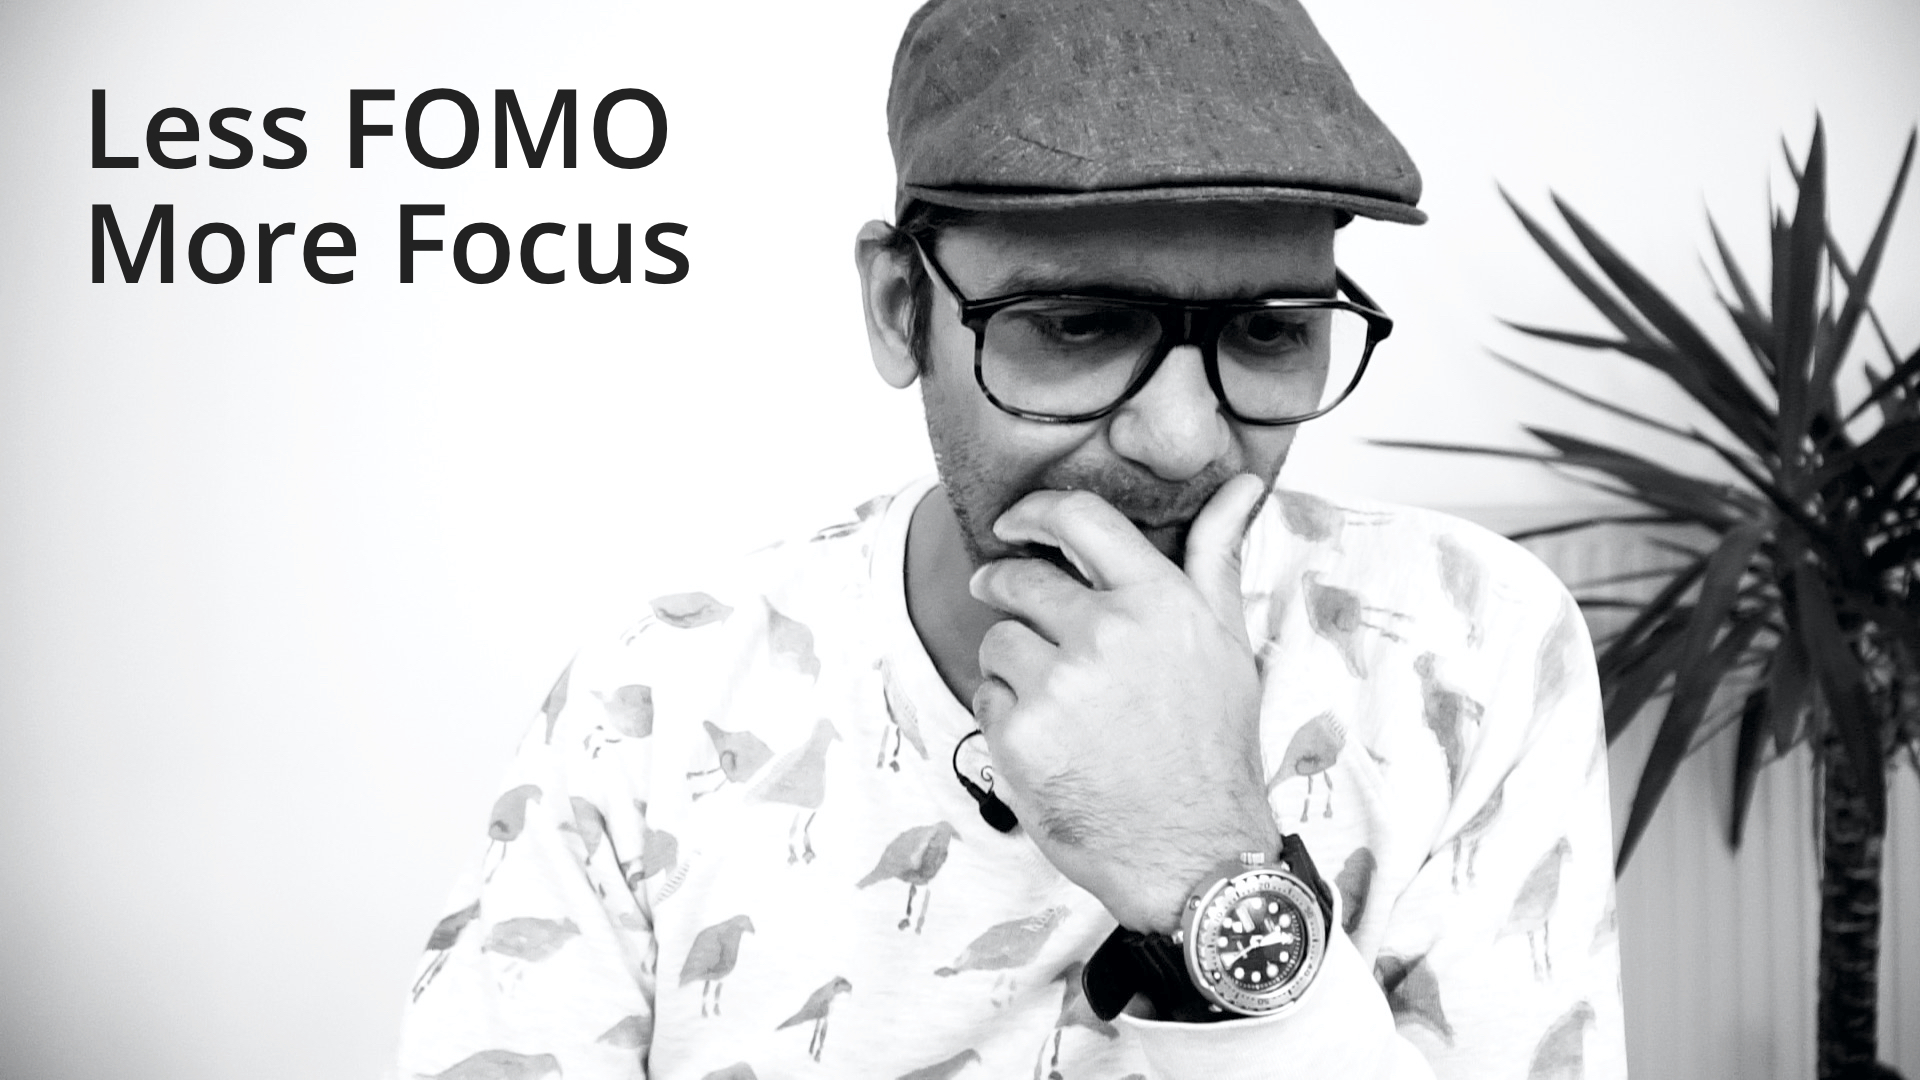 Do you suffer from FOMO?